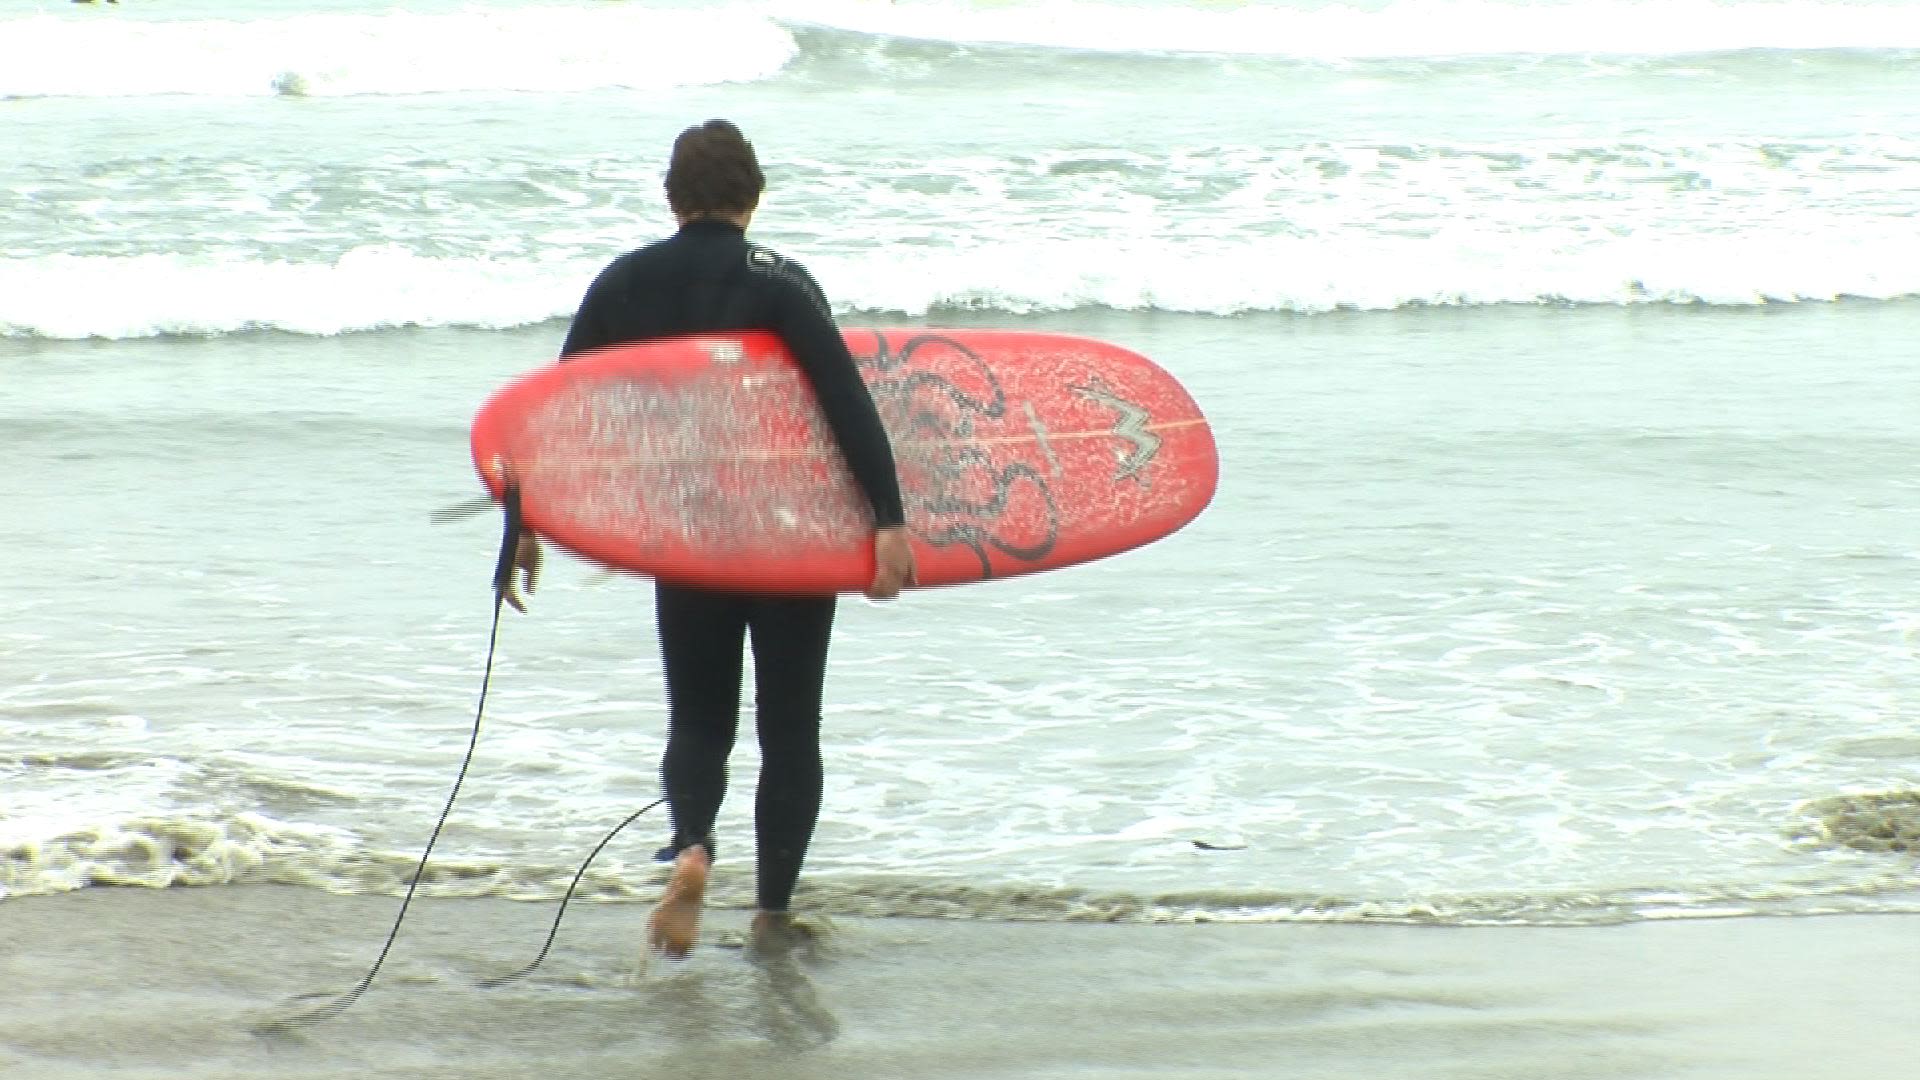 Diving into San Diego's surfing culture